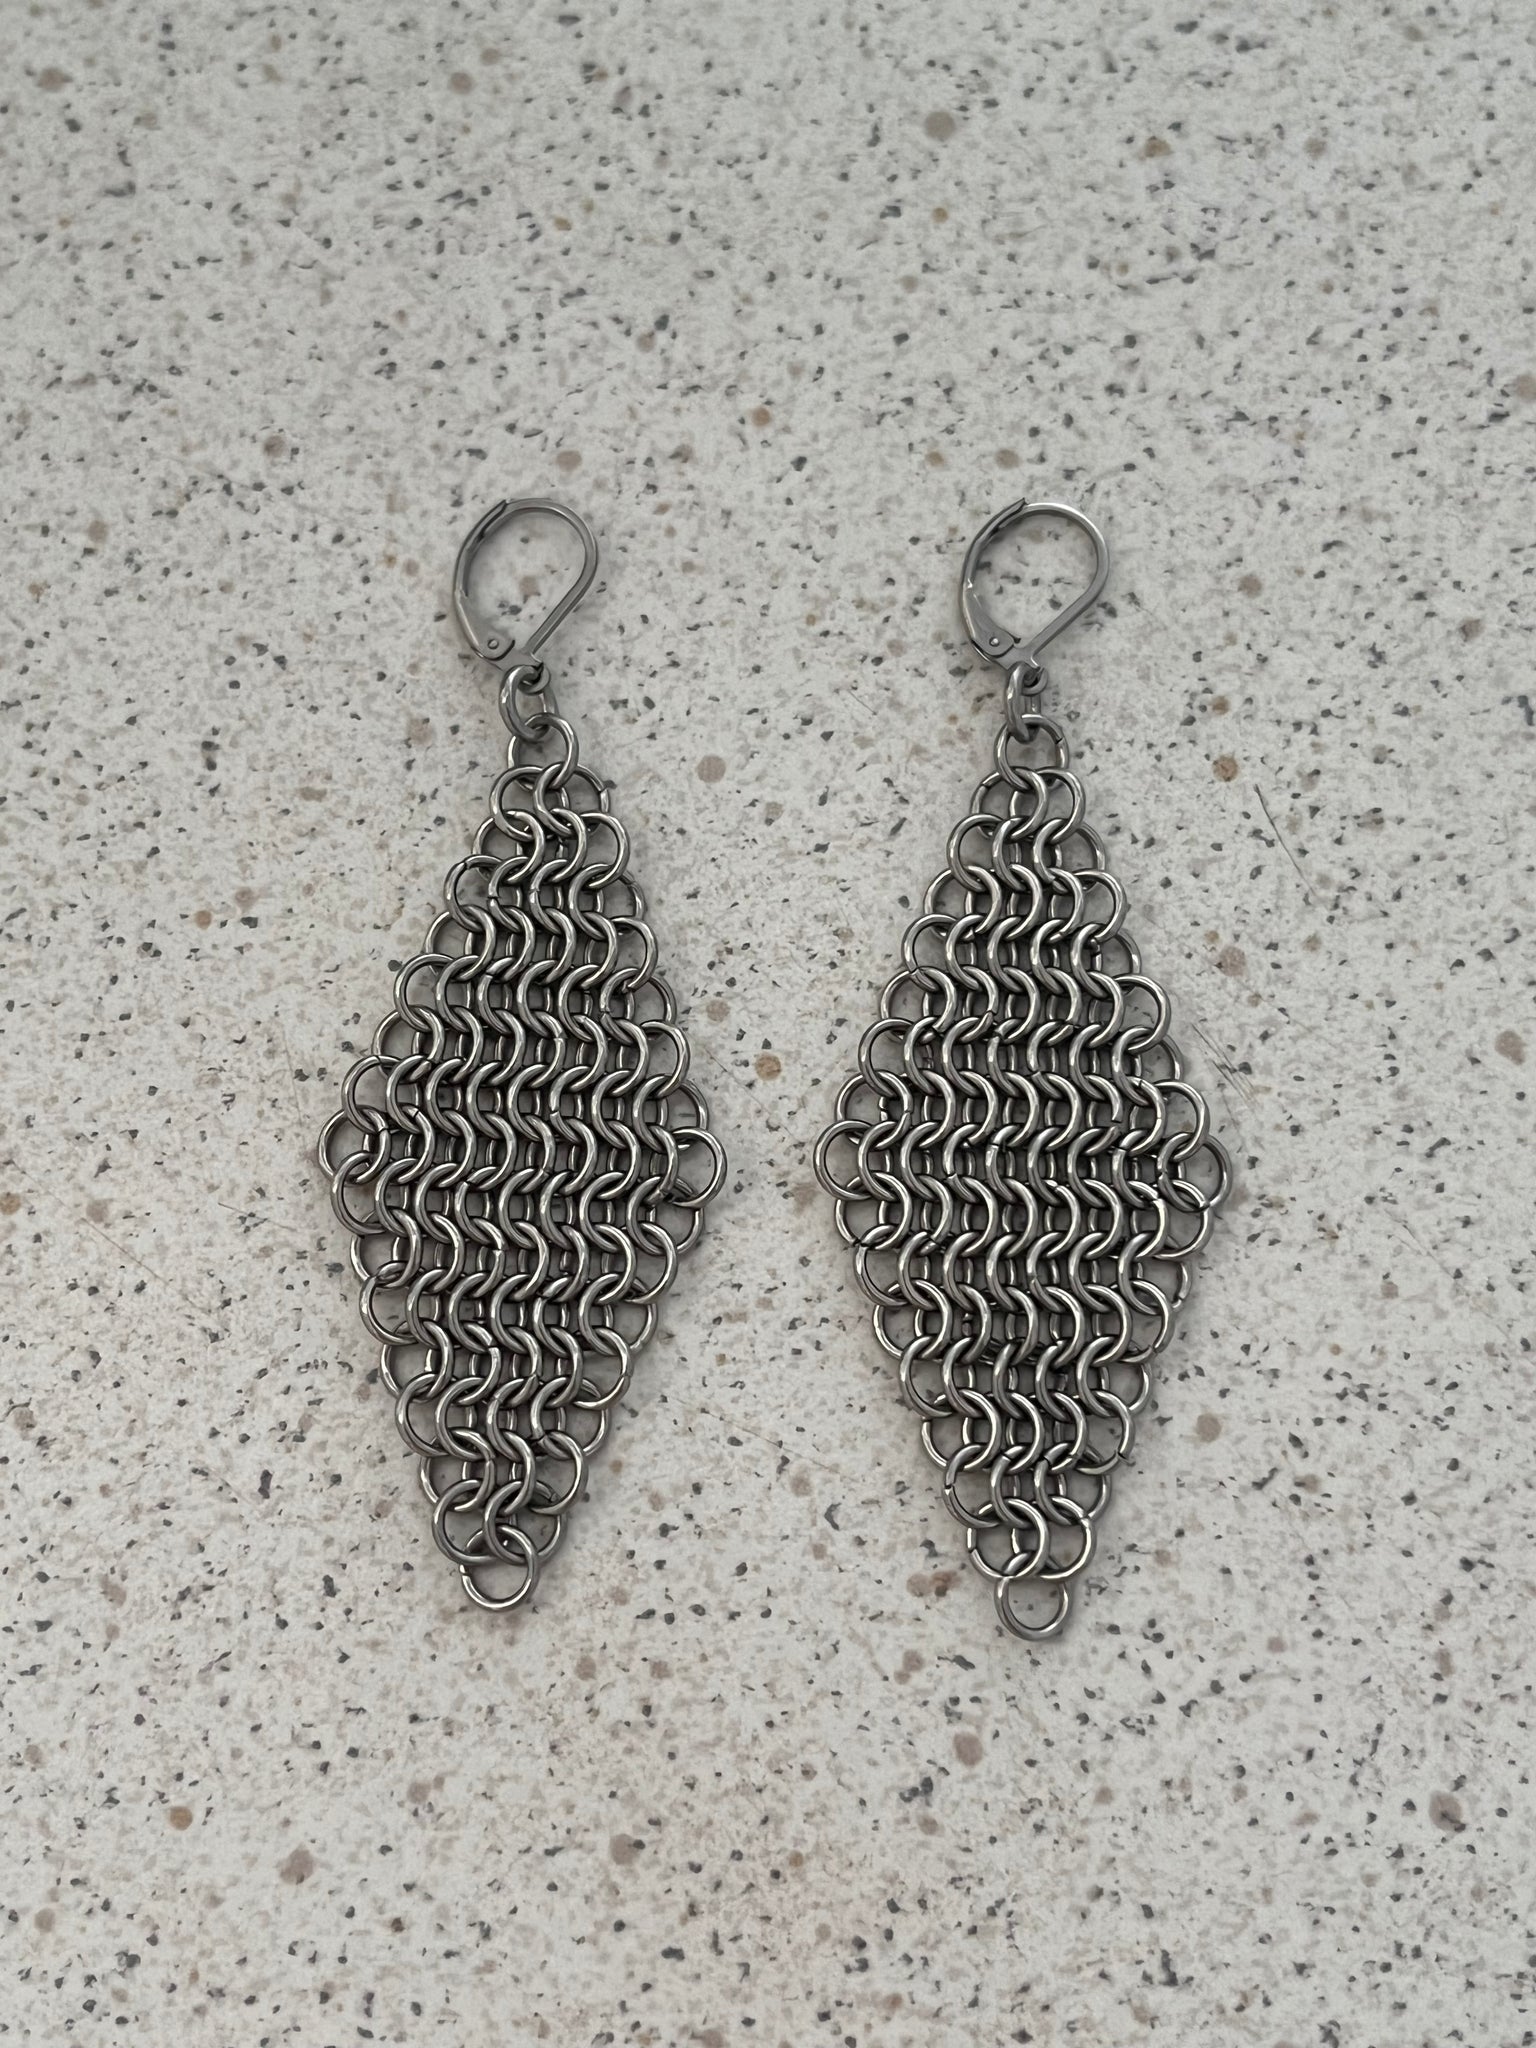 The “CHAINMAIL” earrings